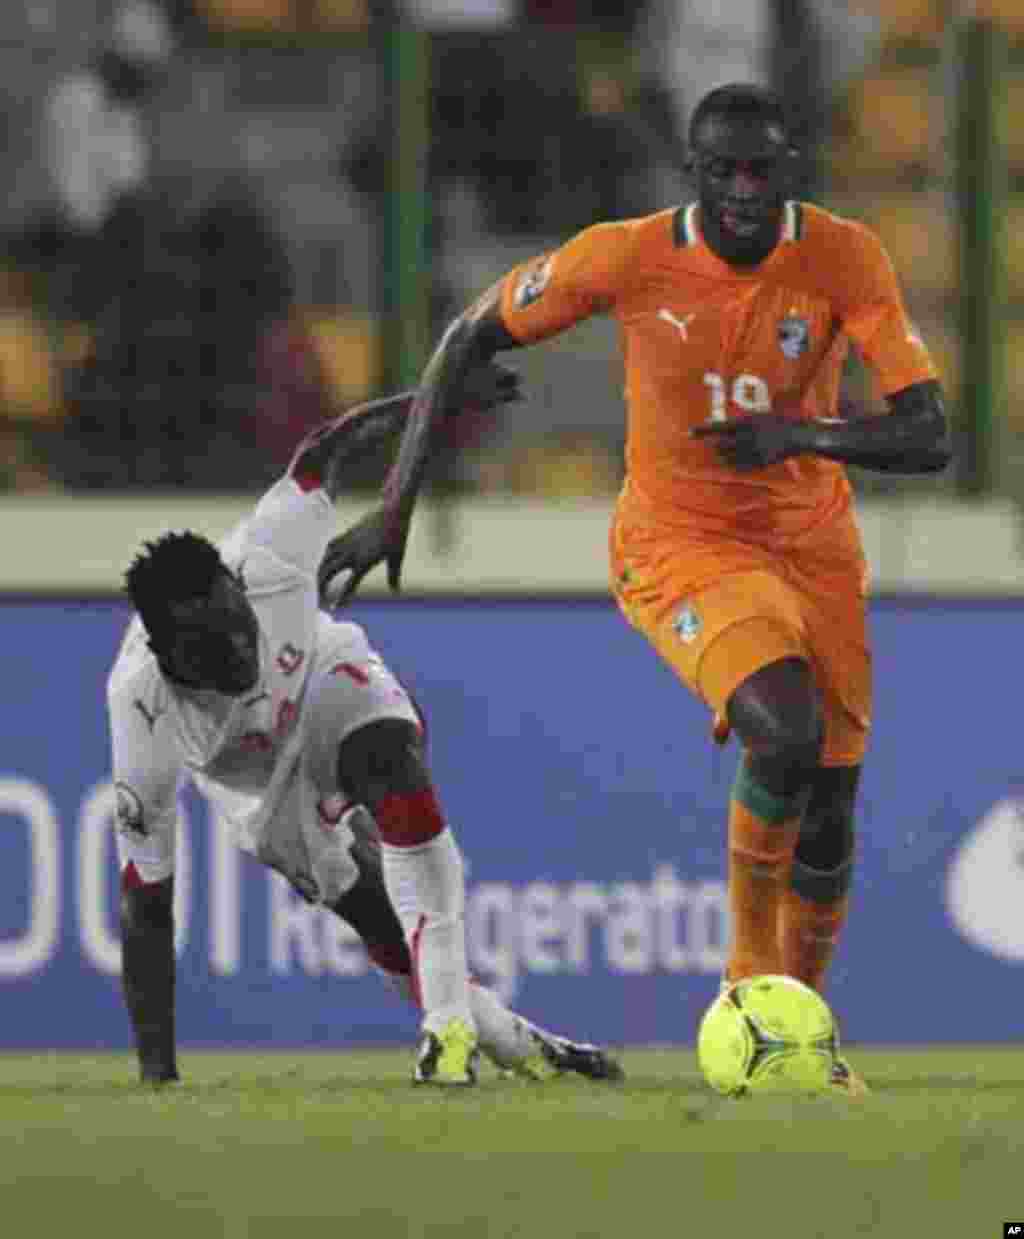 Yaya Toure (R) of Ivory Coast fights for the ball with Ben Konate of Equatorial Guinea during their quarter-final match at the African Nations Cup soccer tournament in Malabo February 4, 2012.